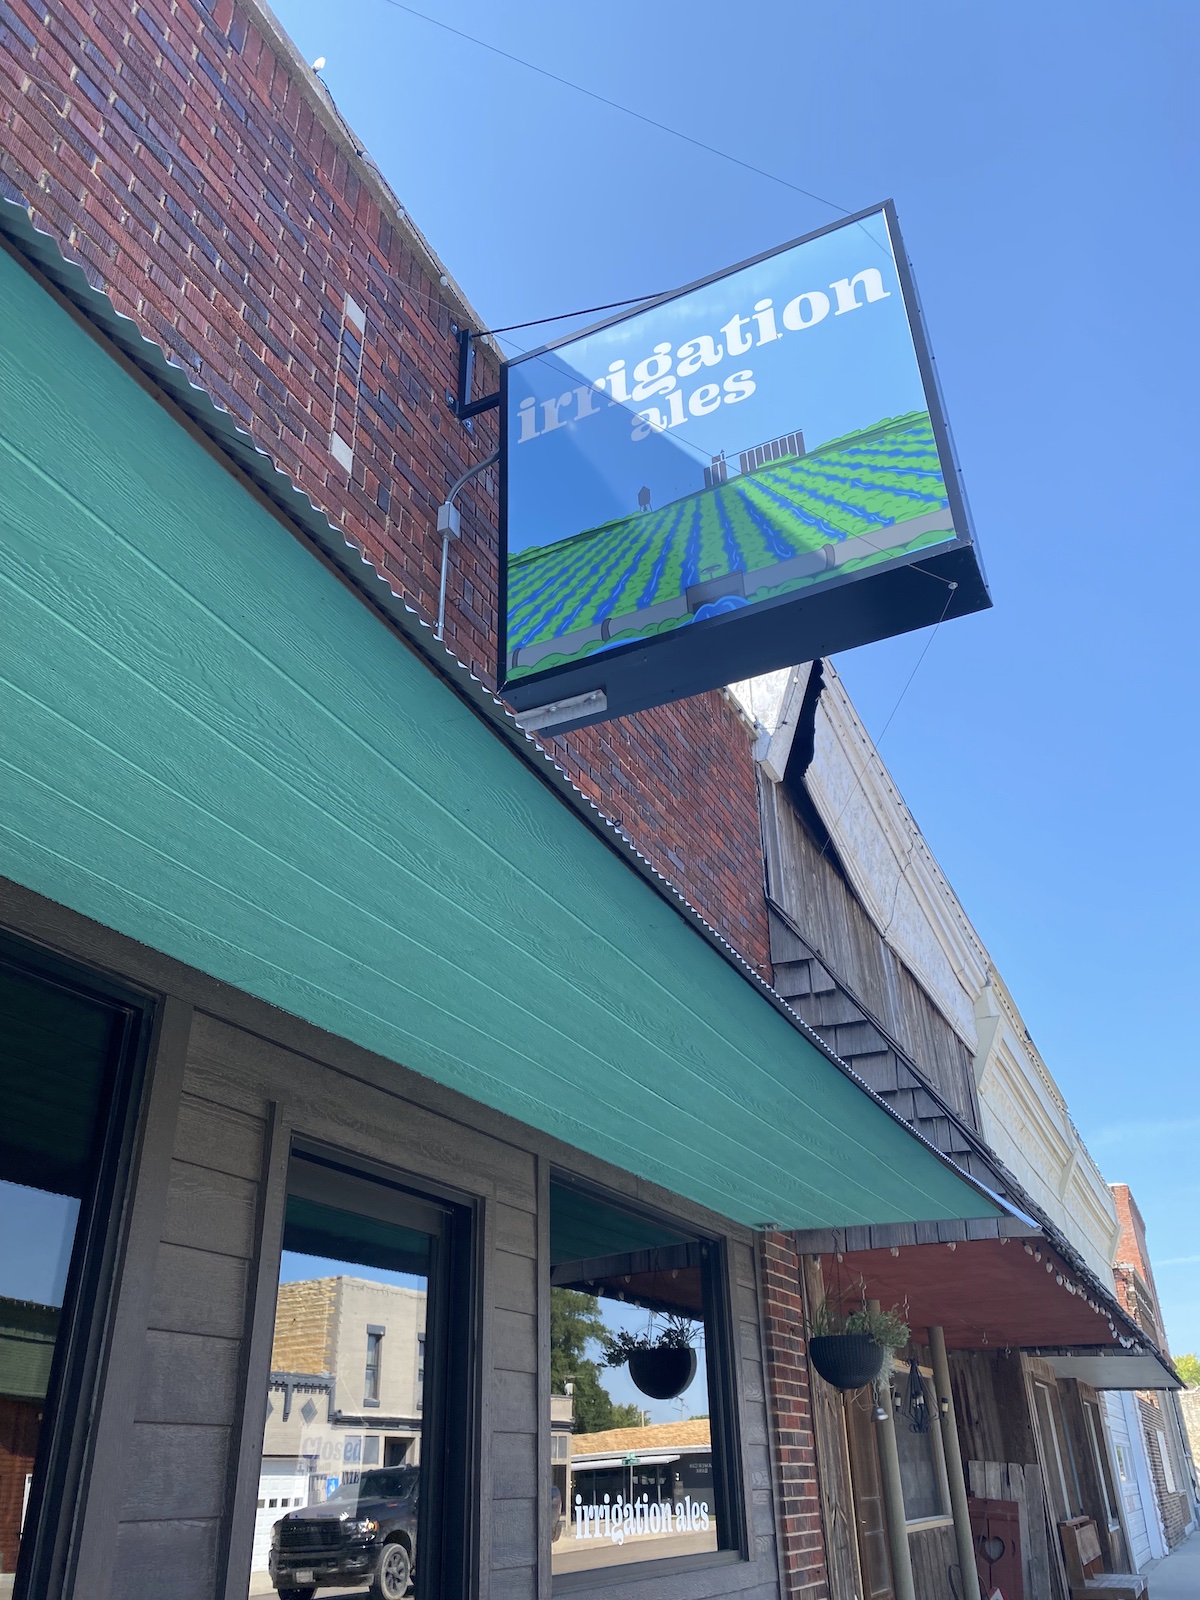 Exterior signage for Irrigation Ales in Courtland, Kansas